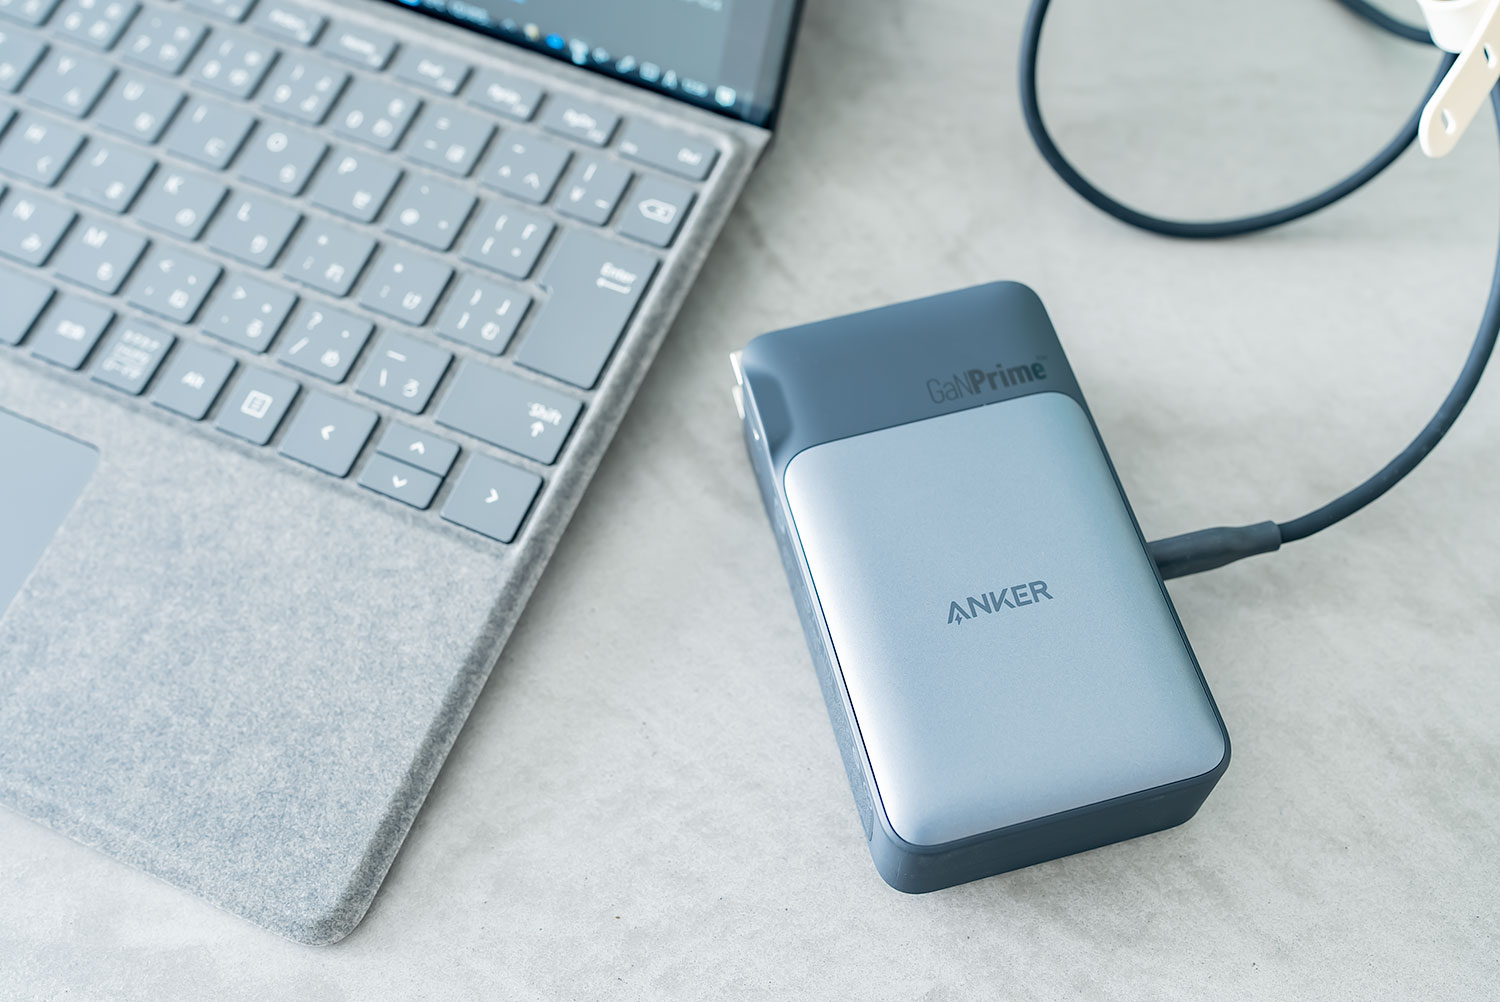 Anker 733 Power Bank　使用イメージ